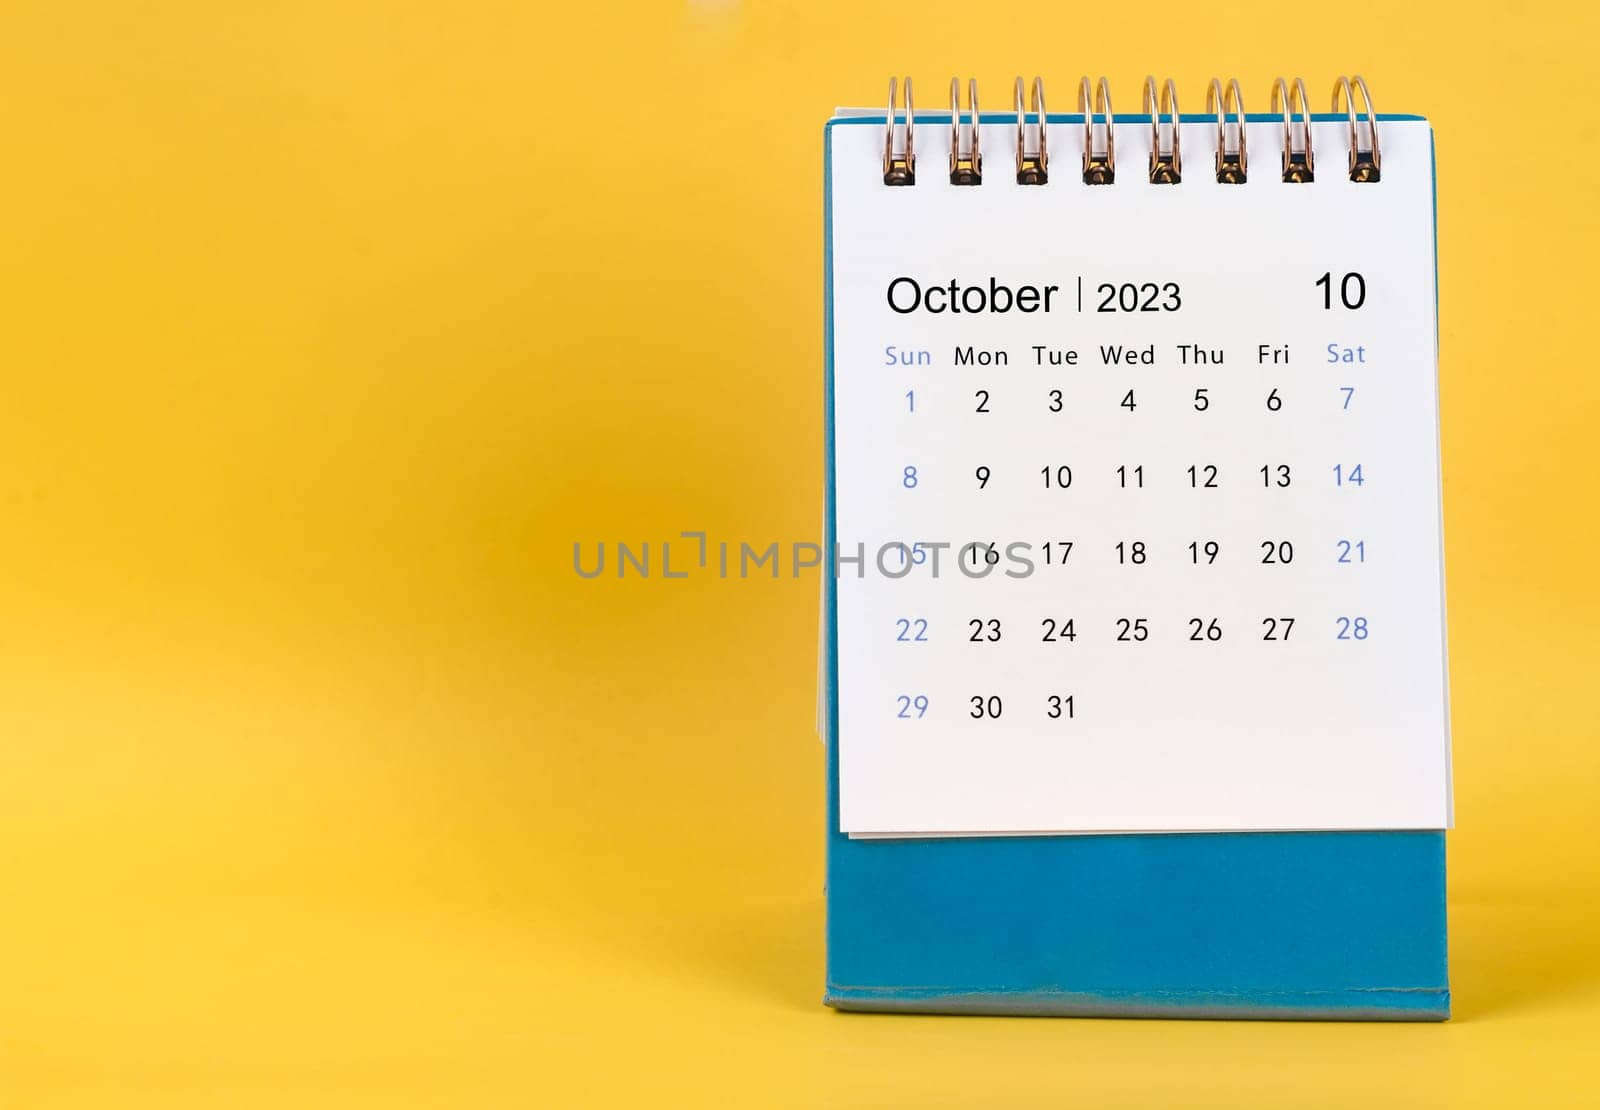 The October 2023 desk calendar on yellow color background. by Gamjai